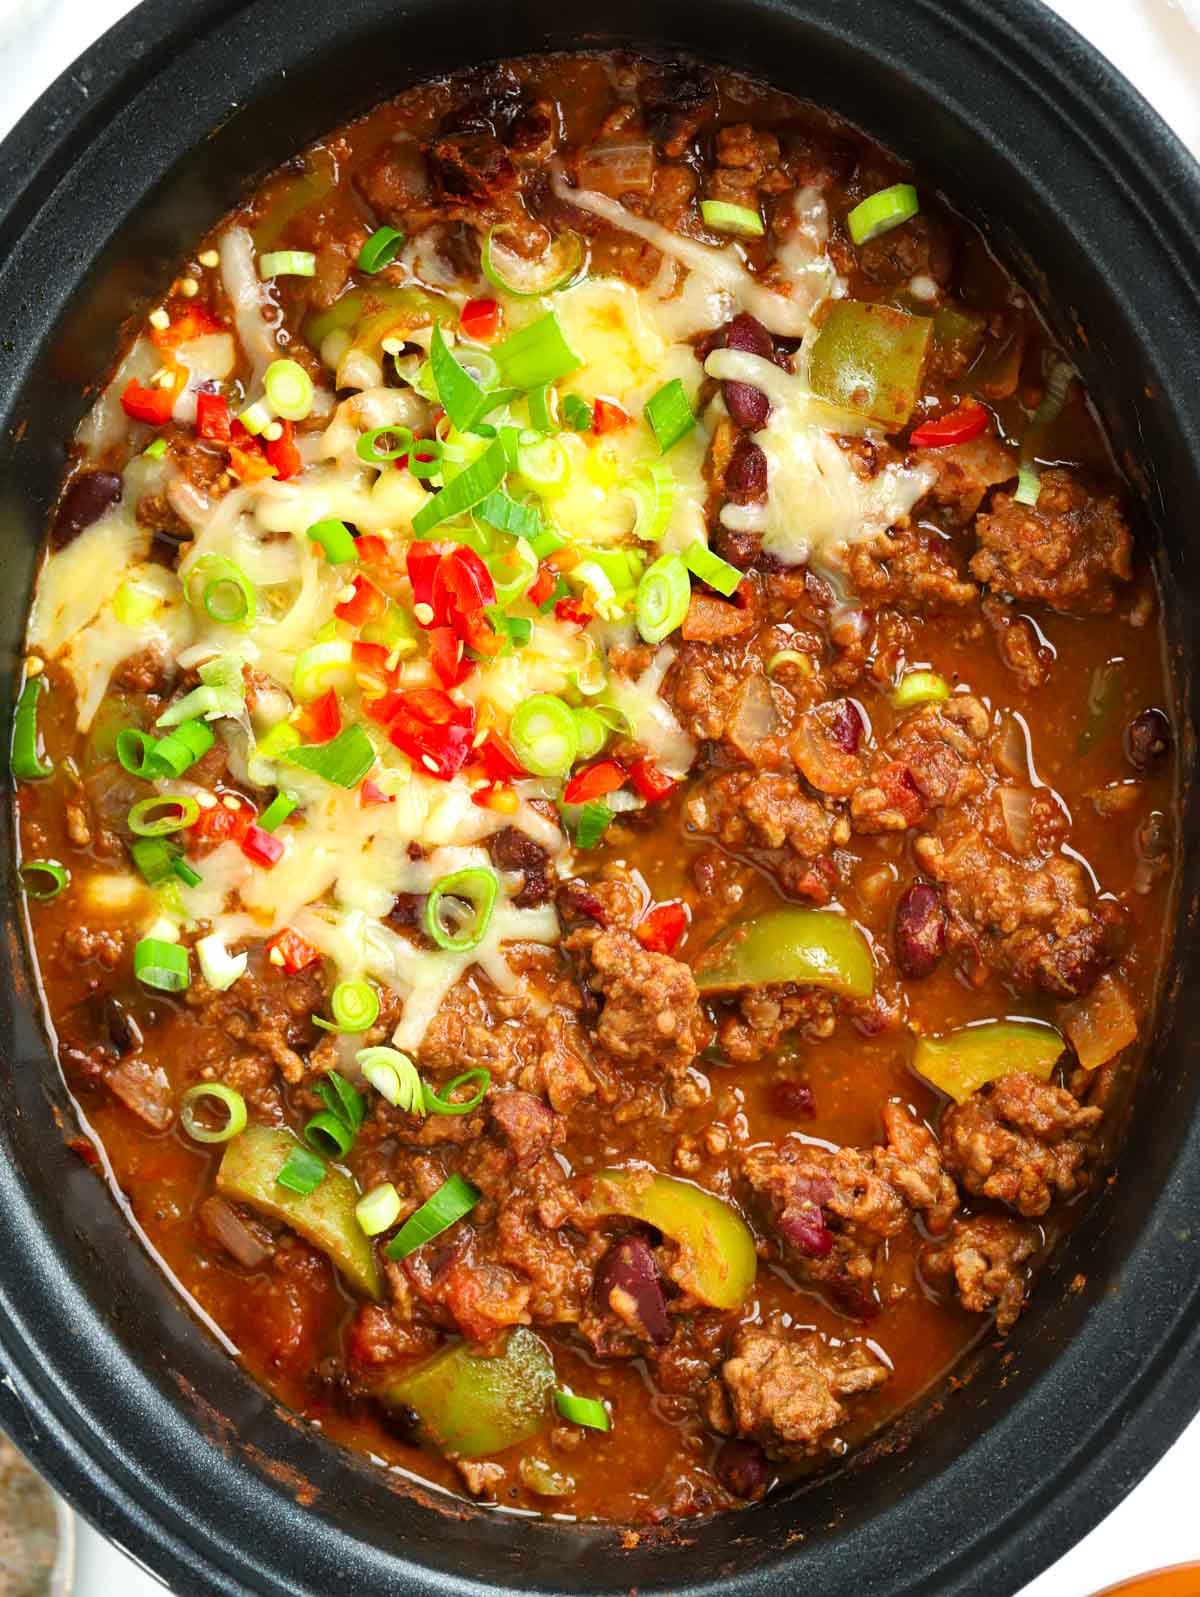 Close up of the dish Chilli Con Carne that's been cooked in the slow cooker.